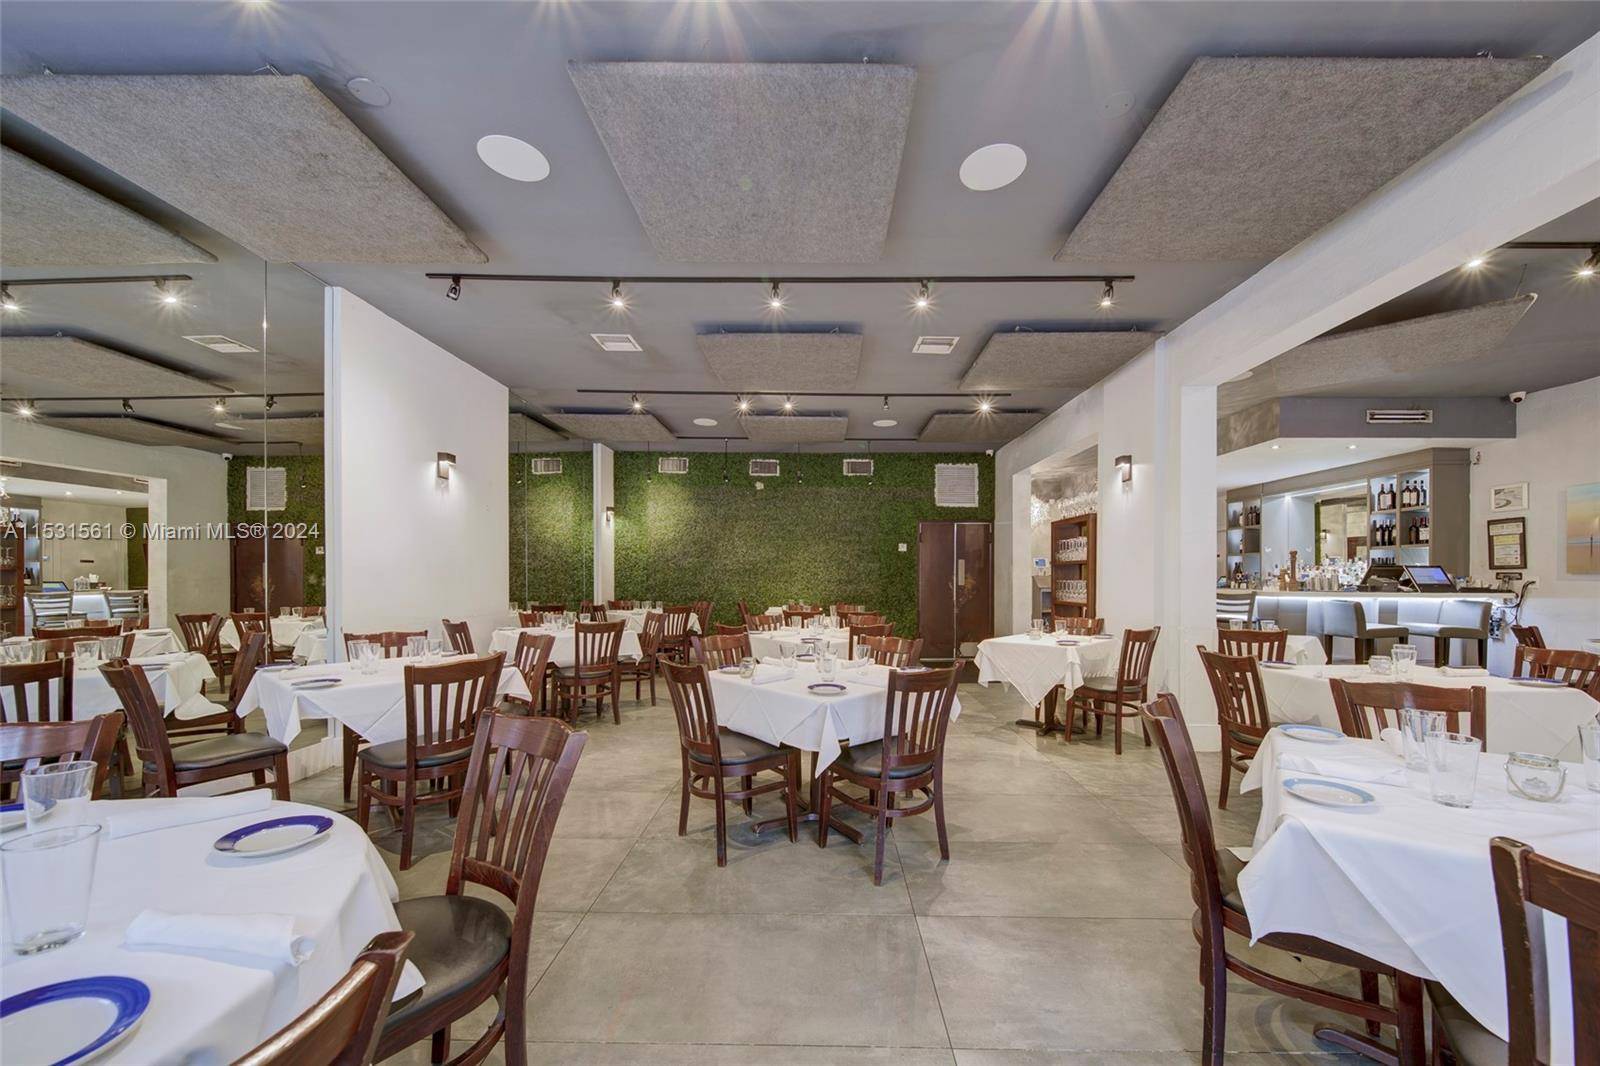 Miami s finest Italian Restaurant for over 20 years with Full Liquor license For Sale right on Bird Road and within walking distance from Merrick Park.